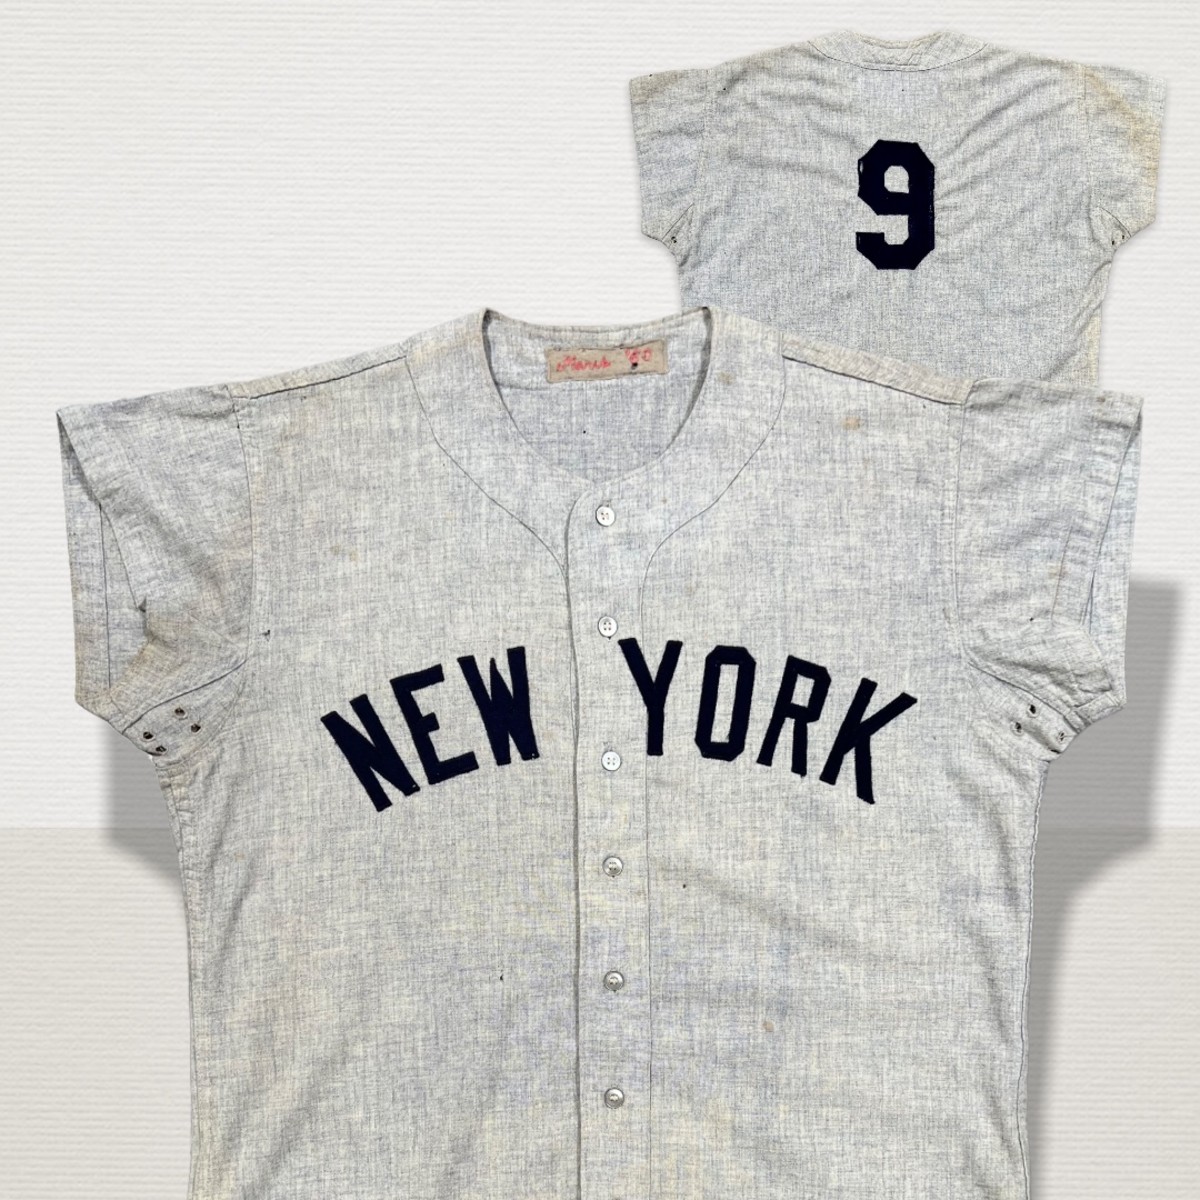 Roger Maris game-worn jersey from the 1960 World Series and the 1961 season when Maris hit a record 61 home runs.